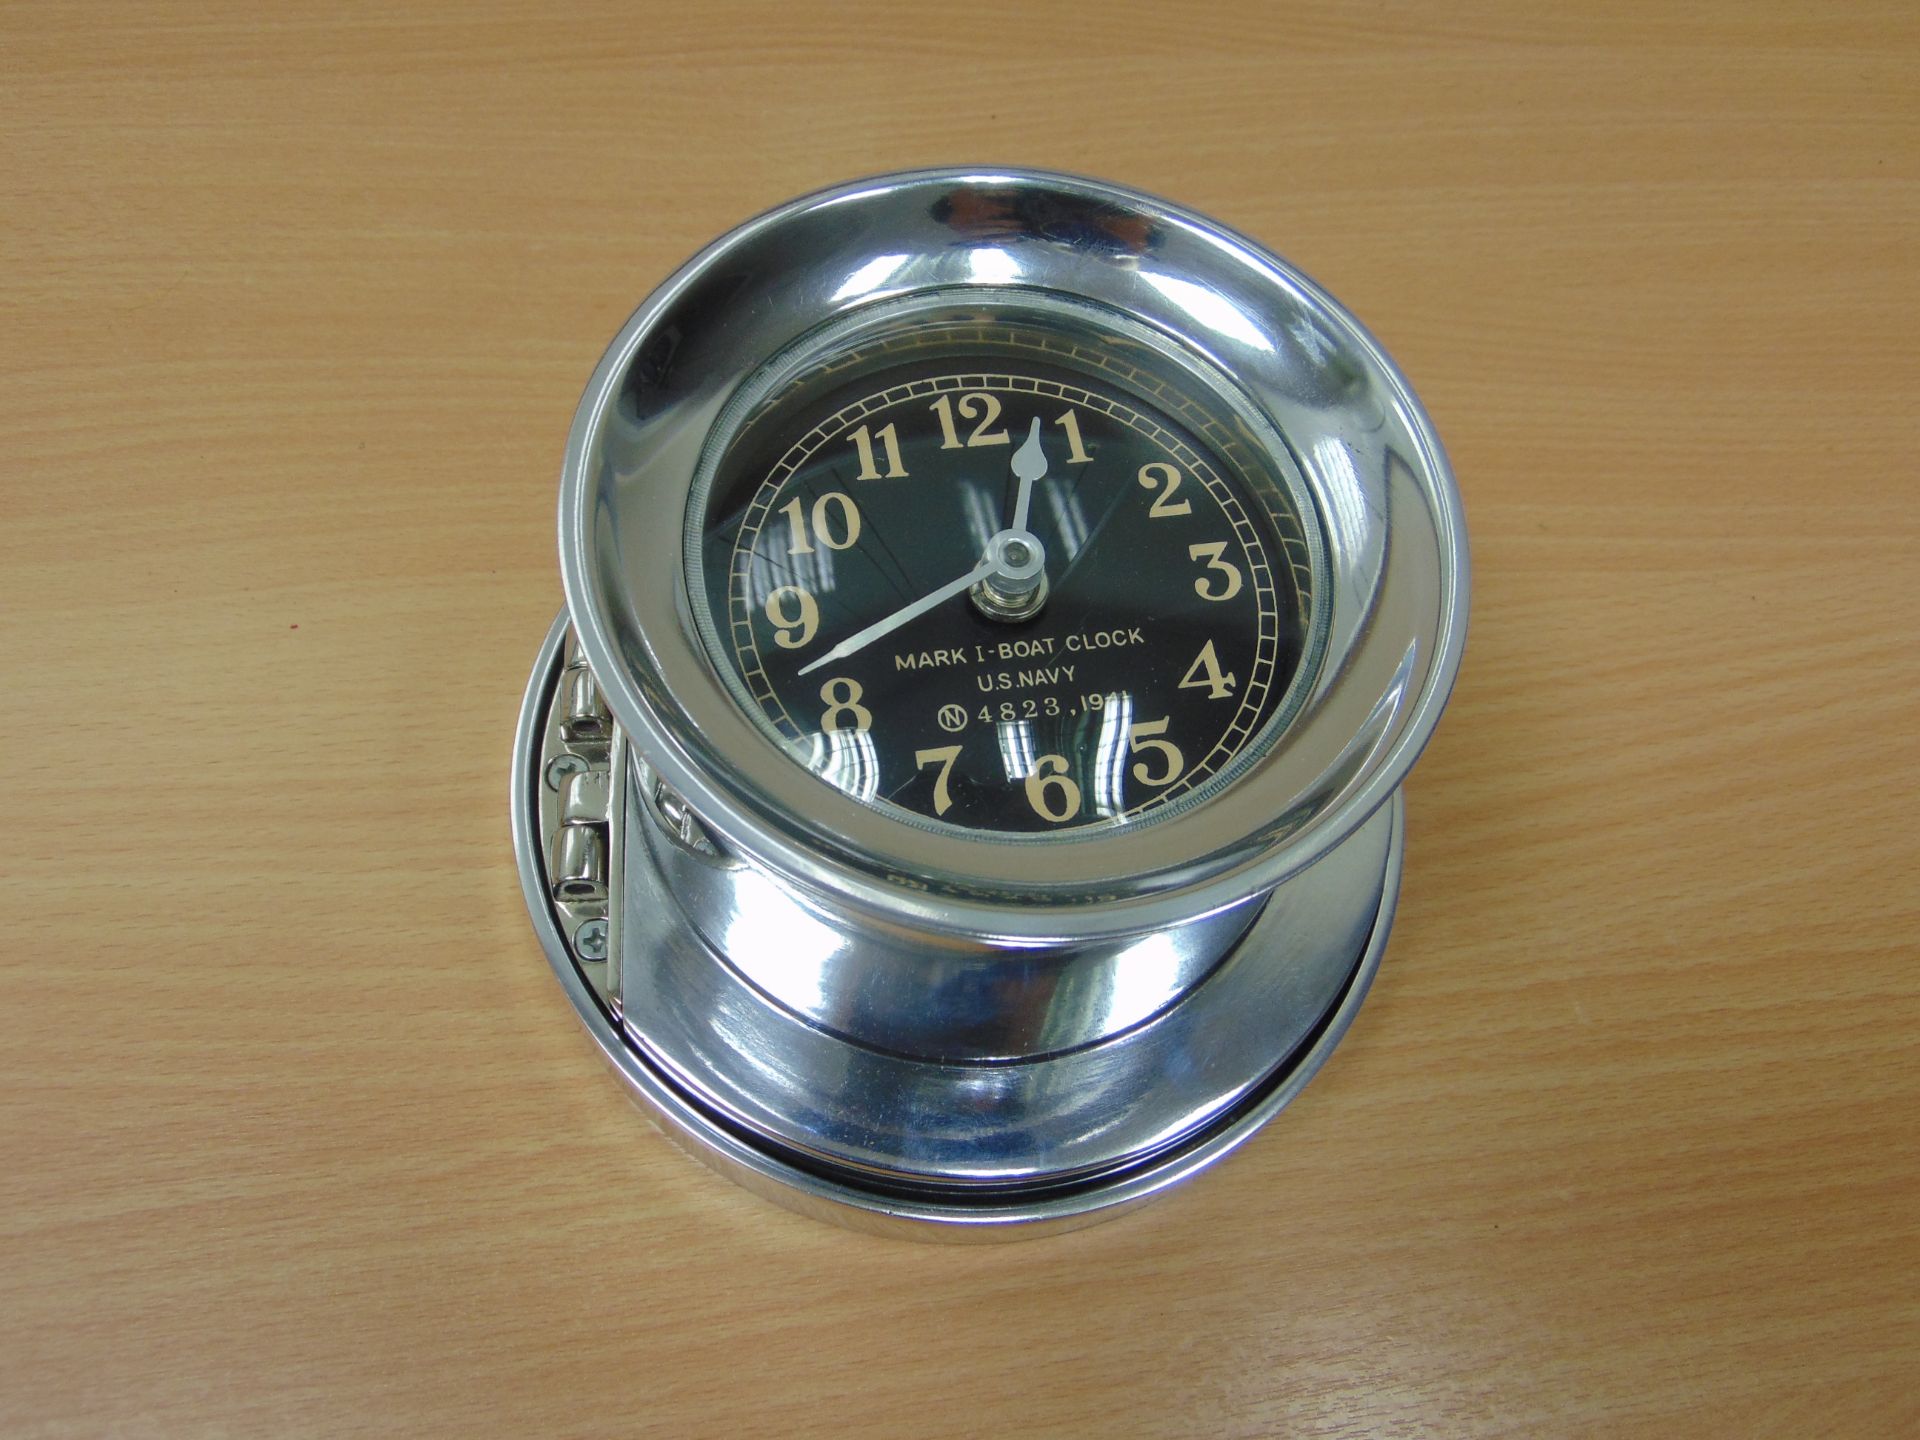 US NAVY WW2 MK1 BOAT CLOCK REPRO IN POLISHED ALLUMINUM WITH MOUNTING SCREW ETC. - Image 2 of 6